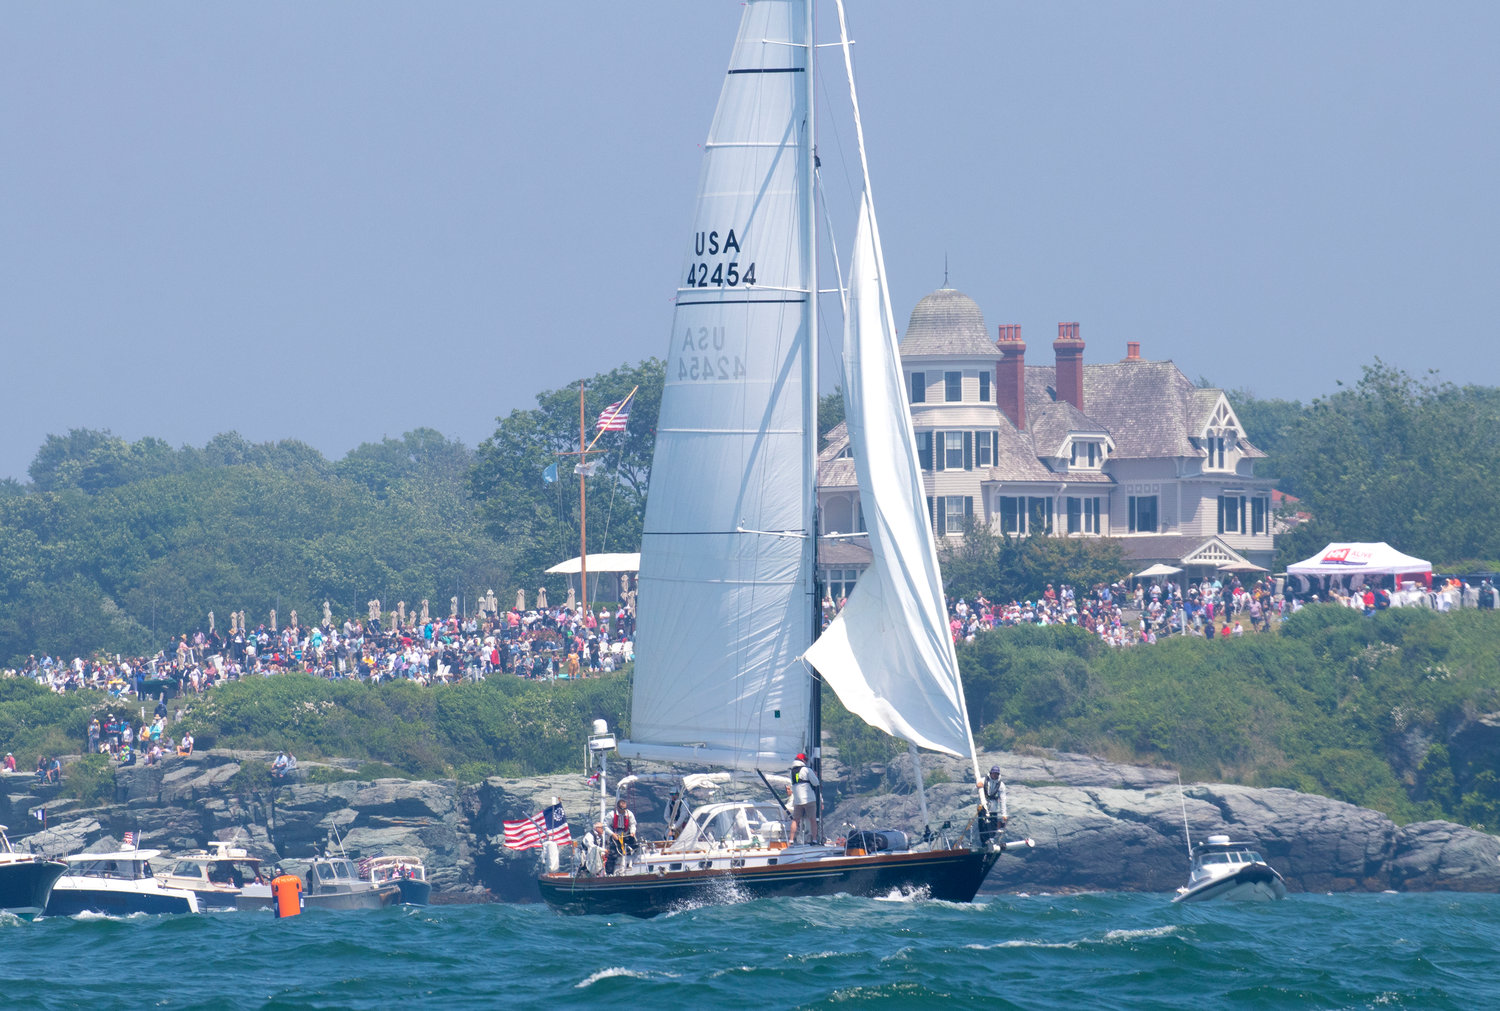 Chasseur, a Little Harbor 54, owned by Miles Cook of NYYC, prepares for the start of the race as it sails by crowded Castle Hill on Friday June 17.